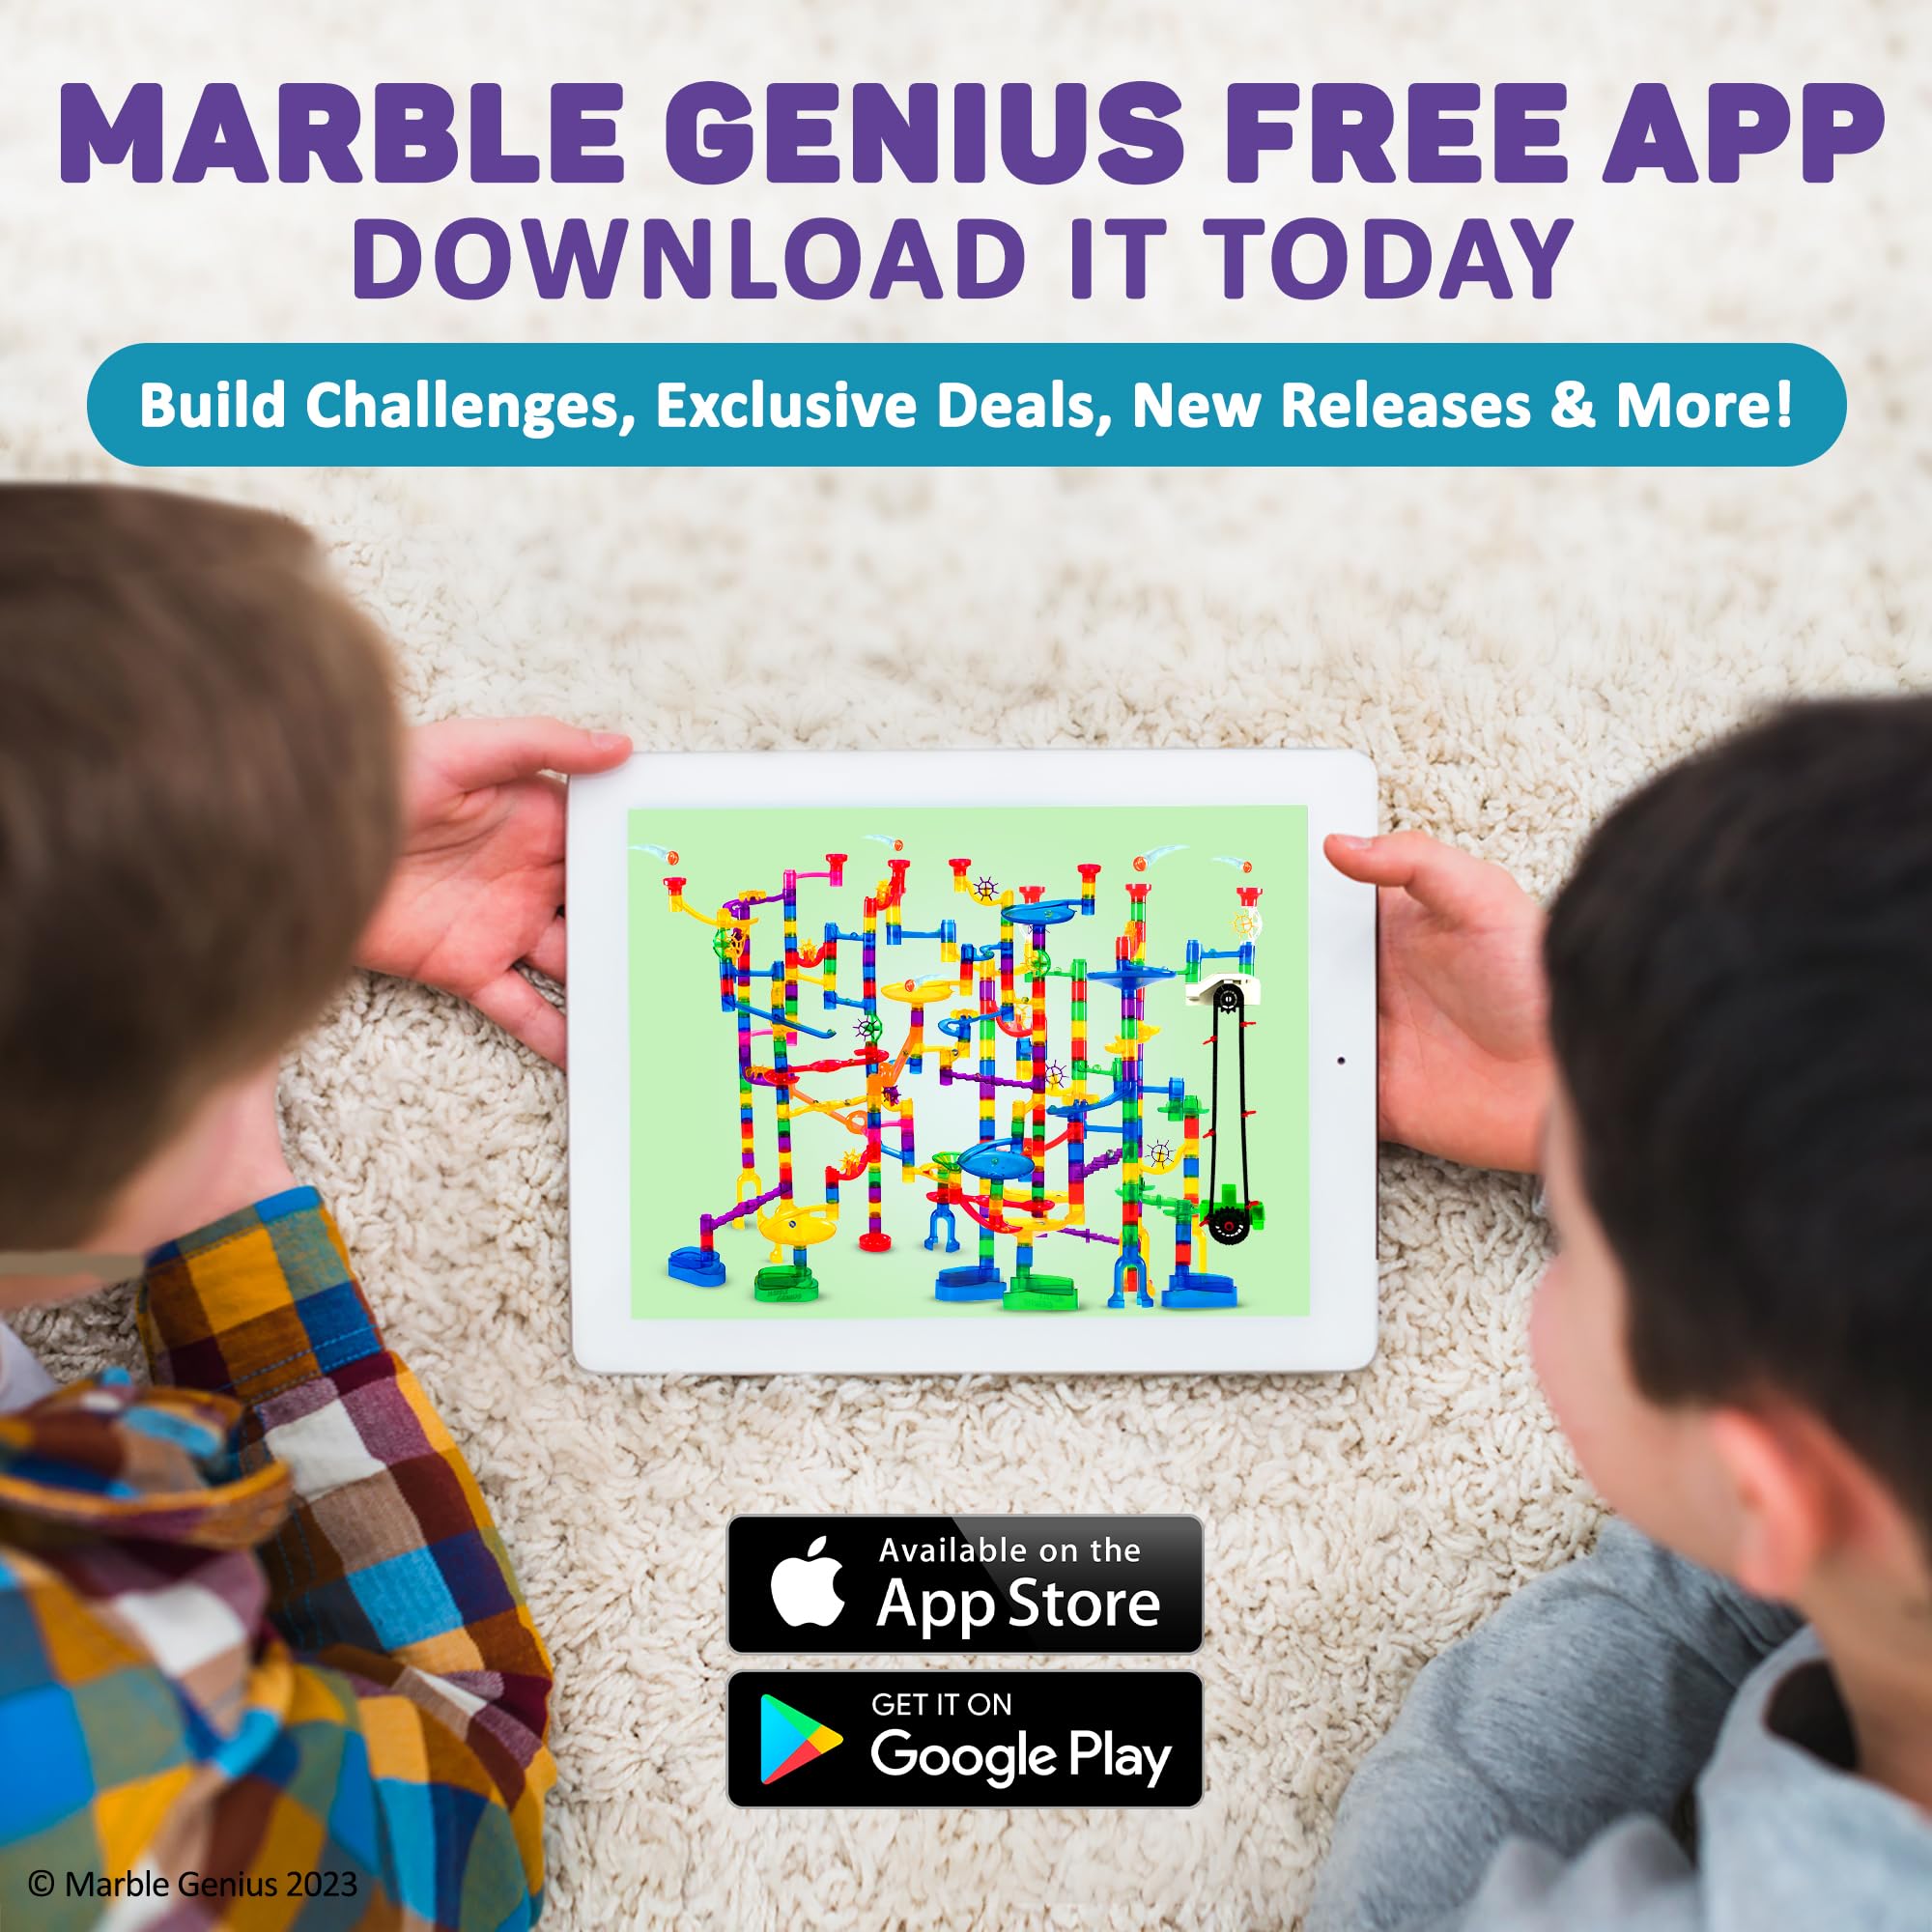 Marble Genius Bundle: Marble Rails Starter Set (200 Pieces), Pipes & Spheres Accessory (10 Pieces), Marble Rails Automatic Chain Lift, with Online App and Full-Color Instructions